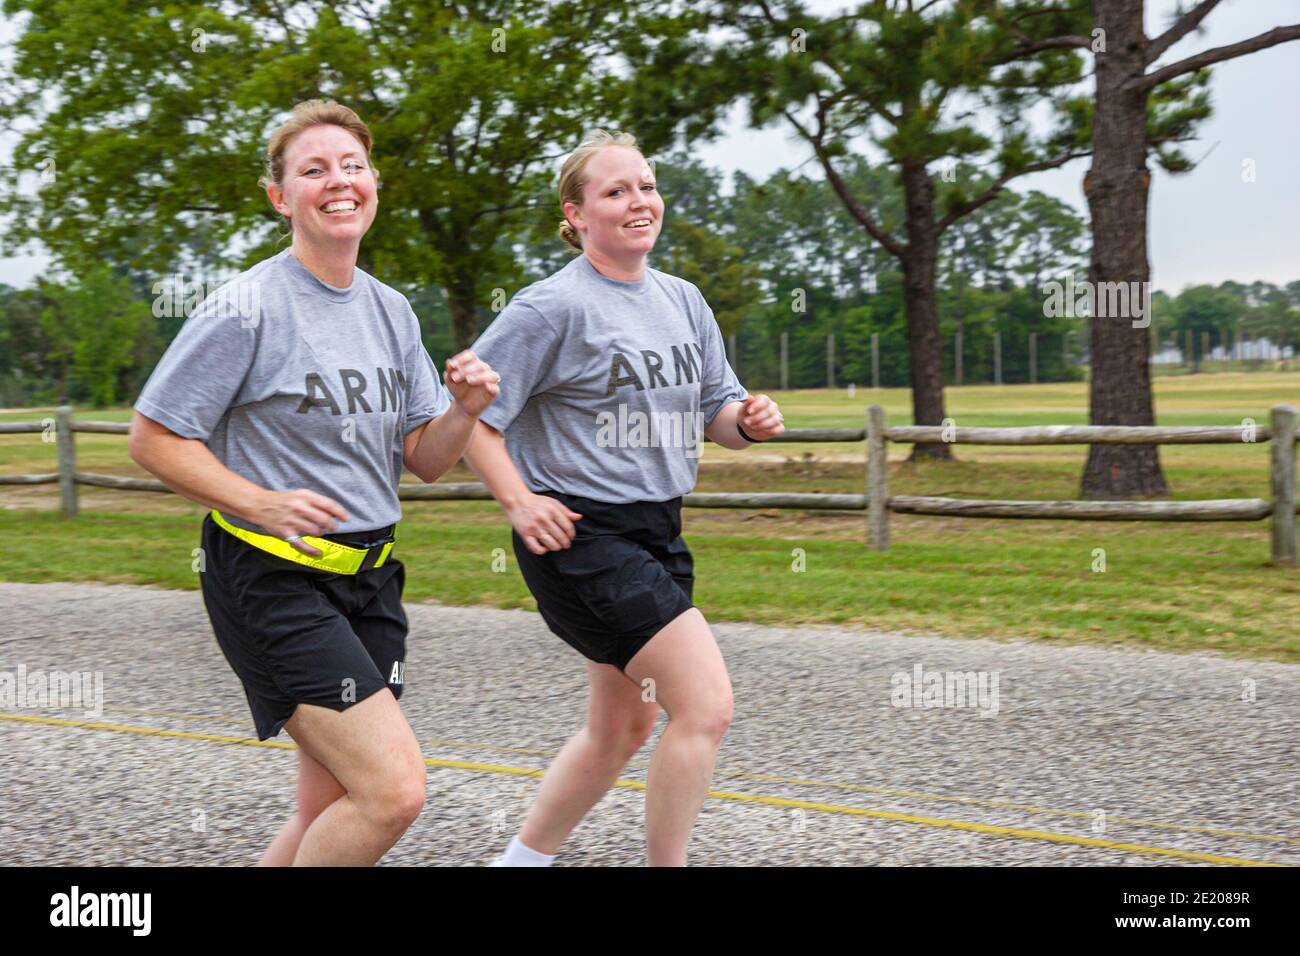 Alabama Mobile Brookley Center centre Army National Guard,Physical Training Program woman female women,runners joggers, Stock Photo